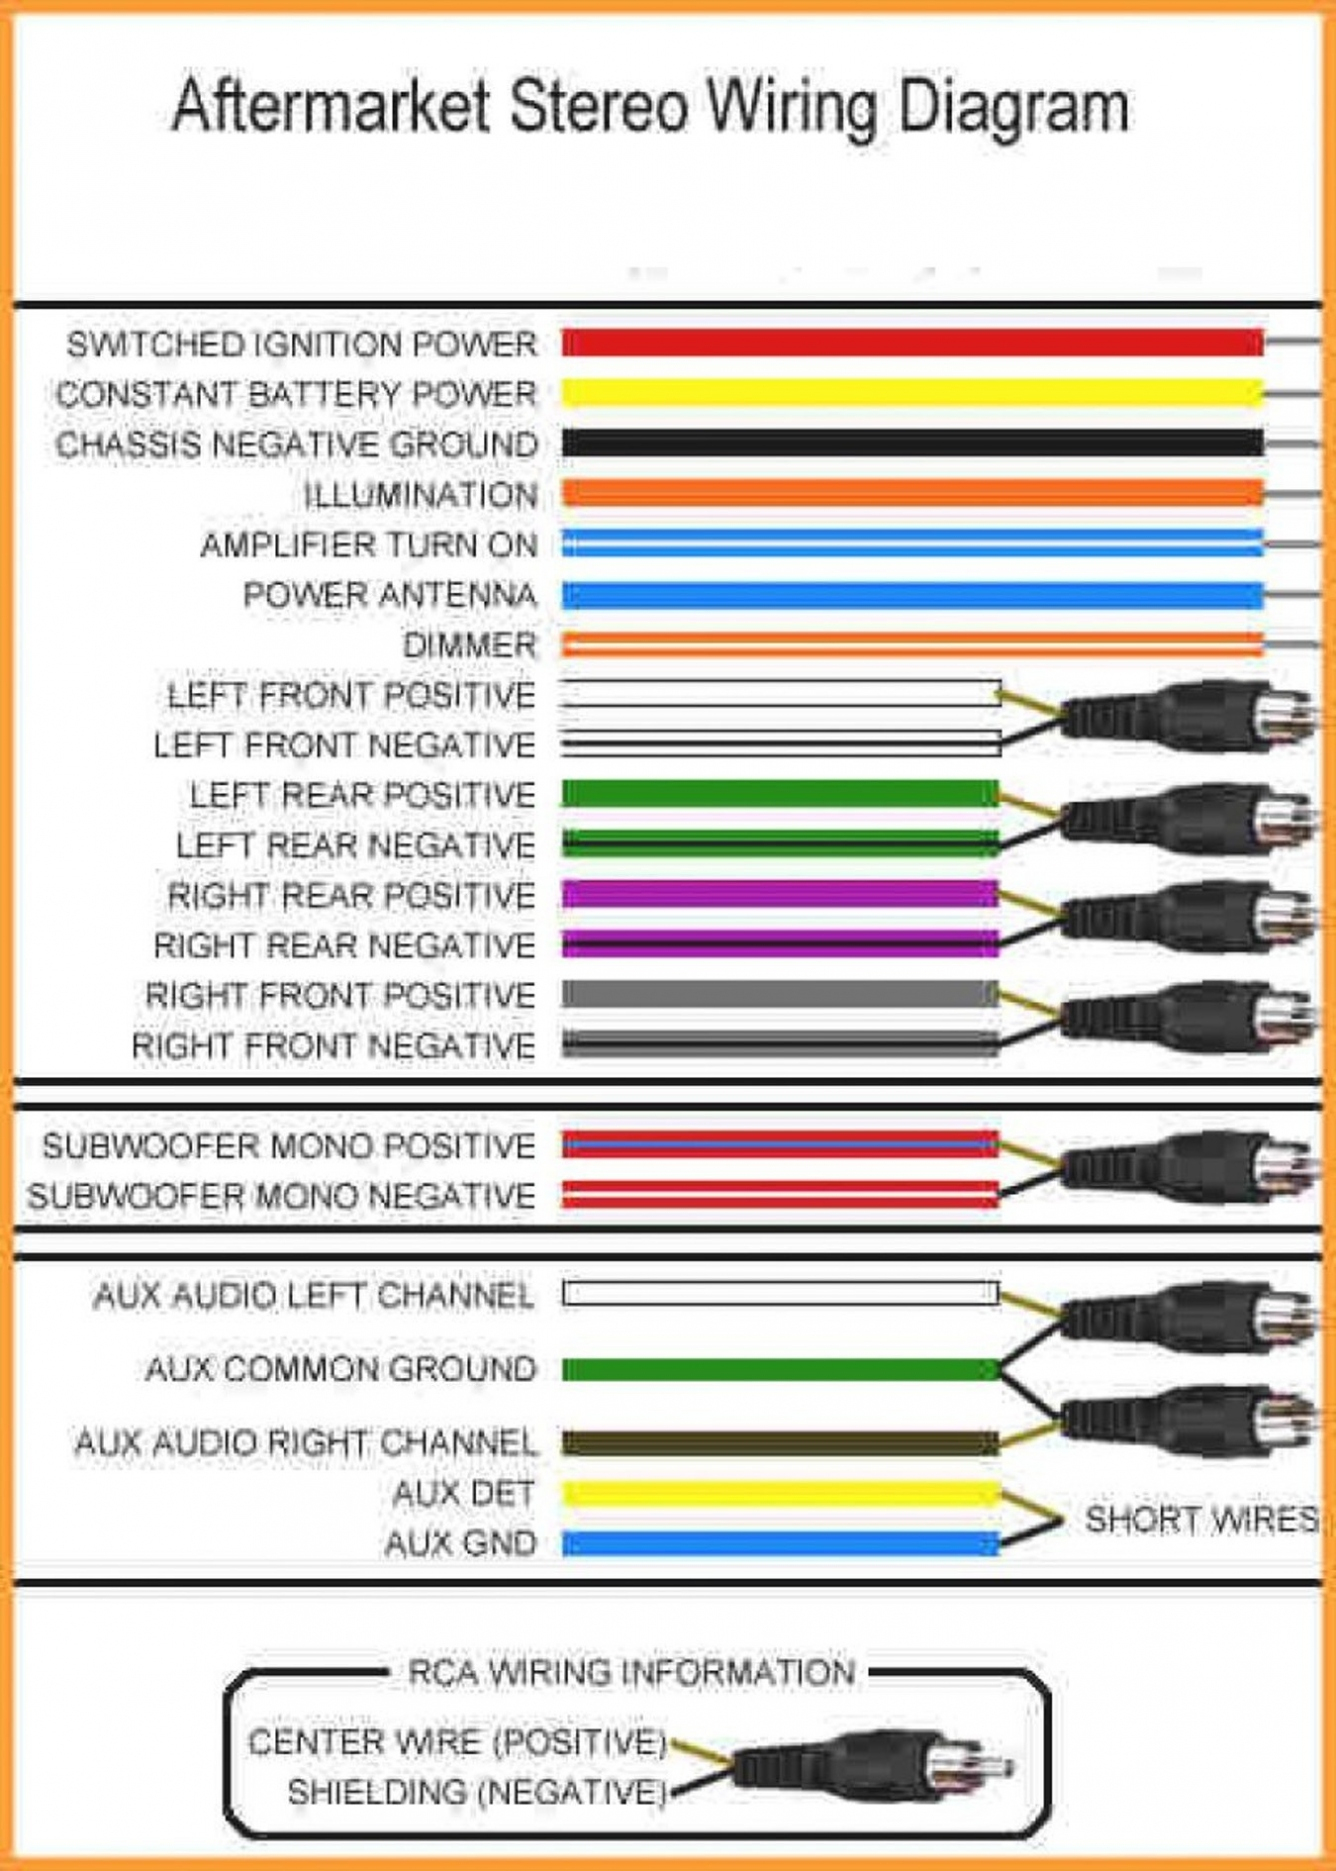 Car Wiring Harness Color Code | Manual E-Books - Kenwood Car Stereo Wiring Diagram